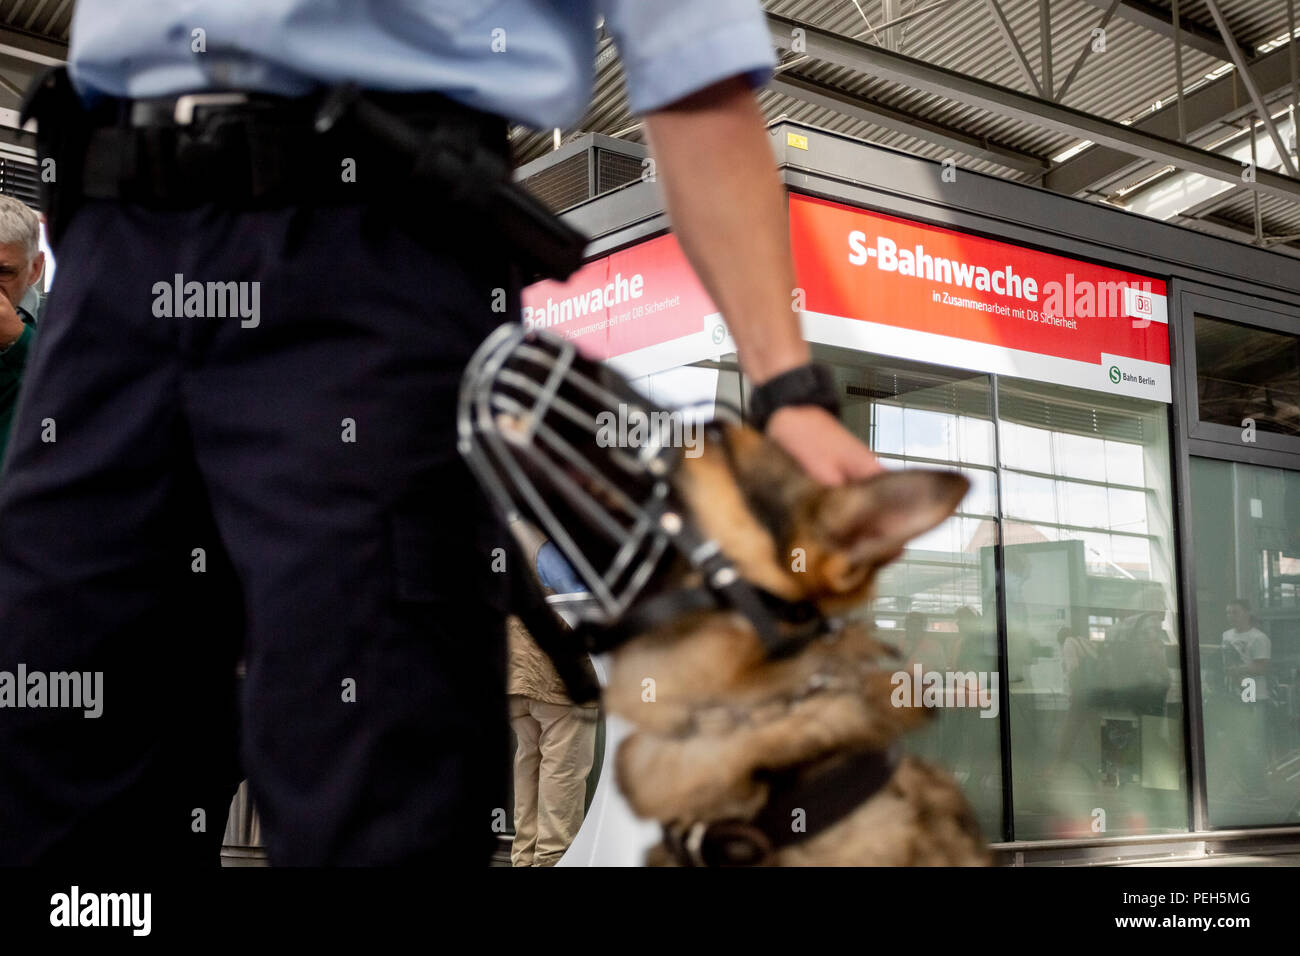 Germany, Berlin. 15th Aug, 2018. At the inauguration of the new S-Bahn station at Ostkreuz, a service dog stands next to an employee of DB-Sicherheit. Security forces are there day and night, accompanied and supported by protection dogs. Credit: Christoph Soeder/dpa/Alamy Live News Stock Photo